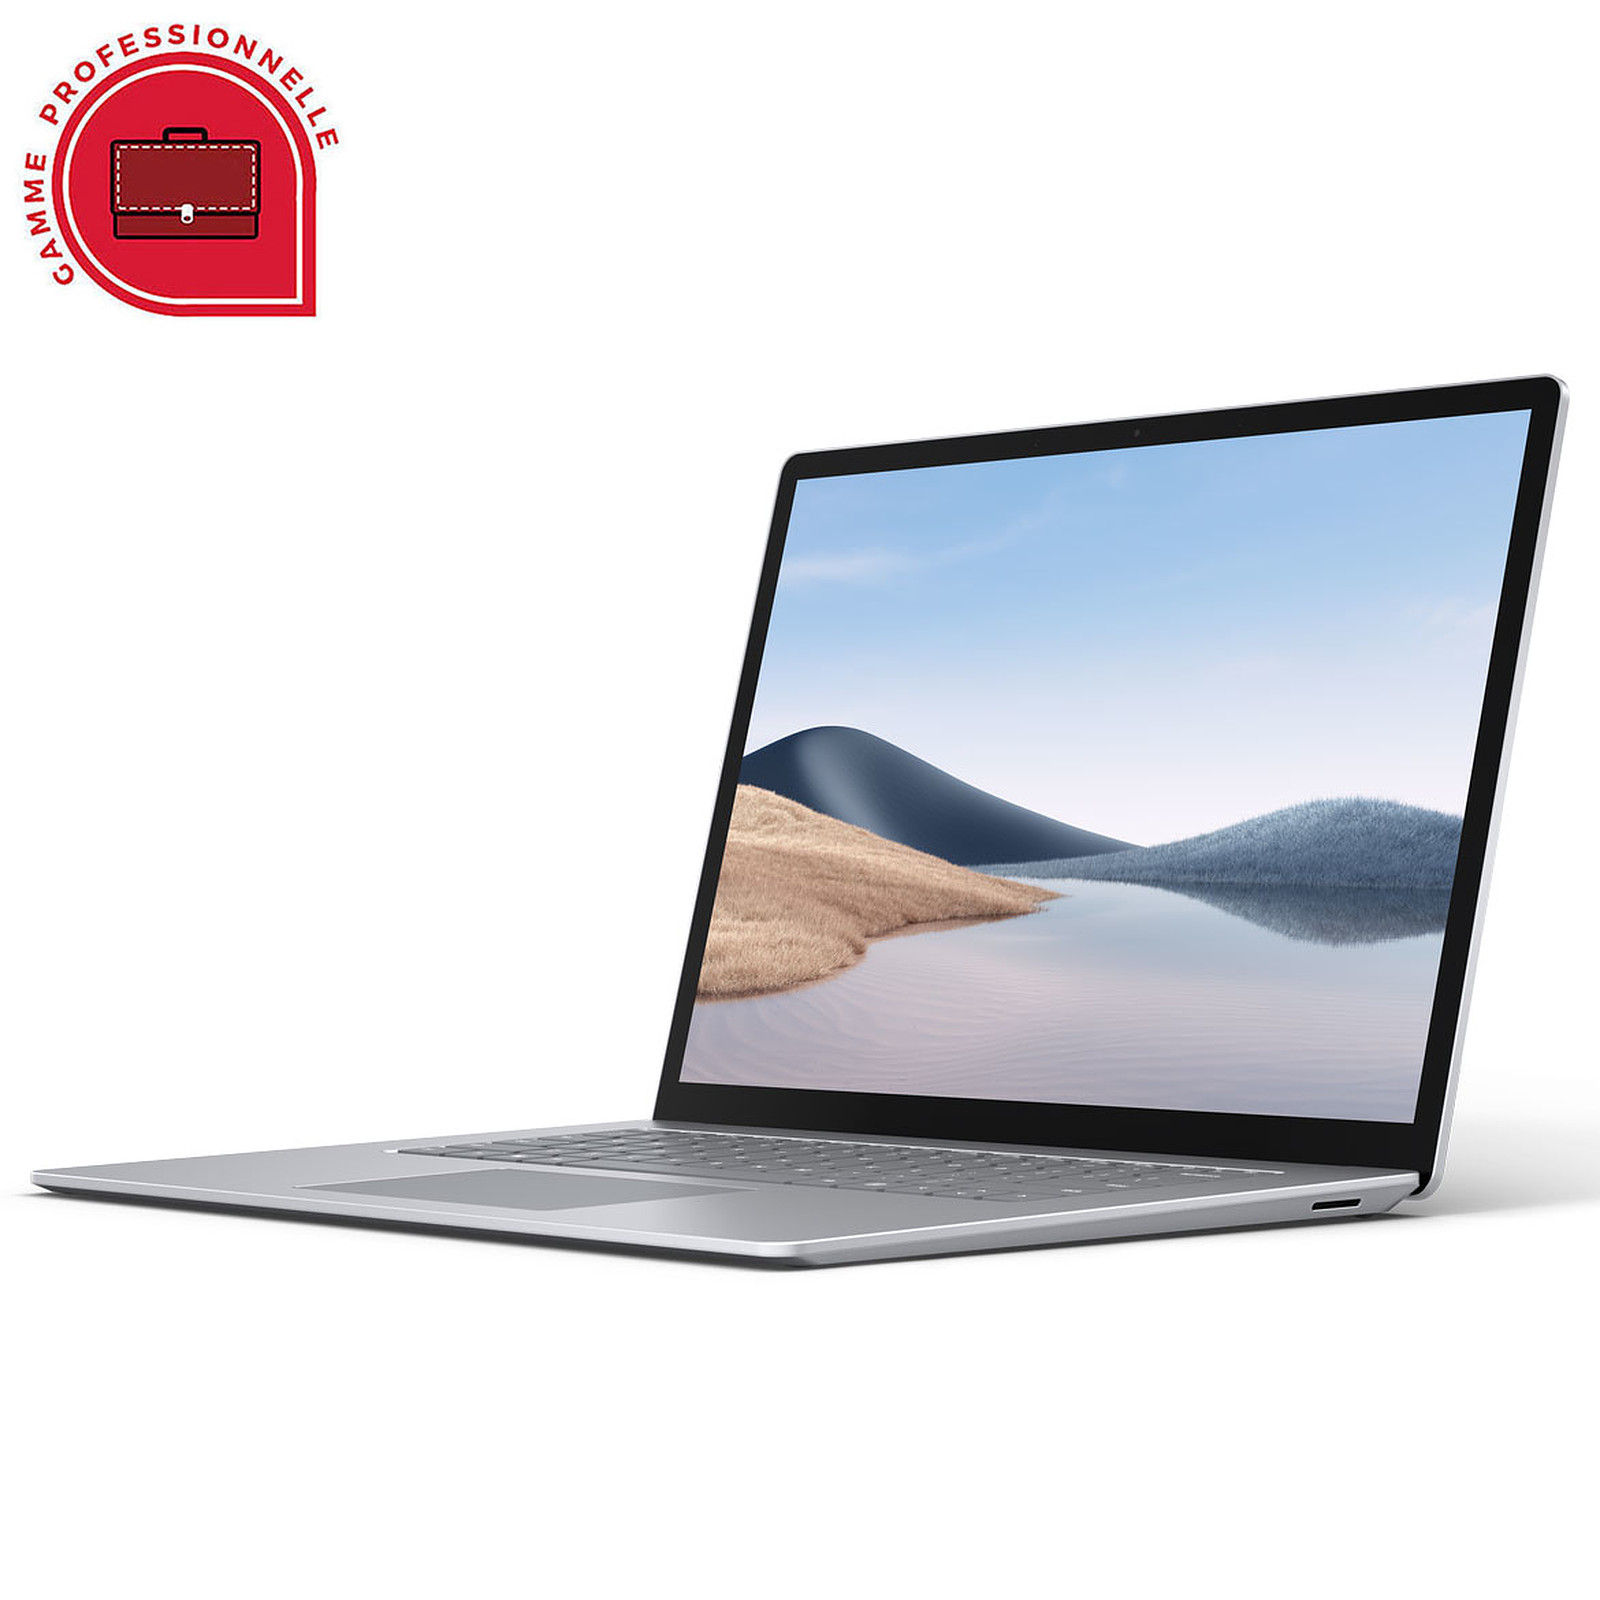 Microsoft Surface Laptop 4 15" for Business - Platine (5IP-00029) - PC portable Microsoft